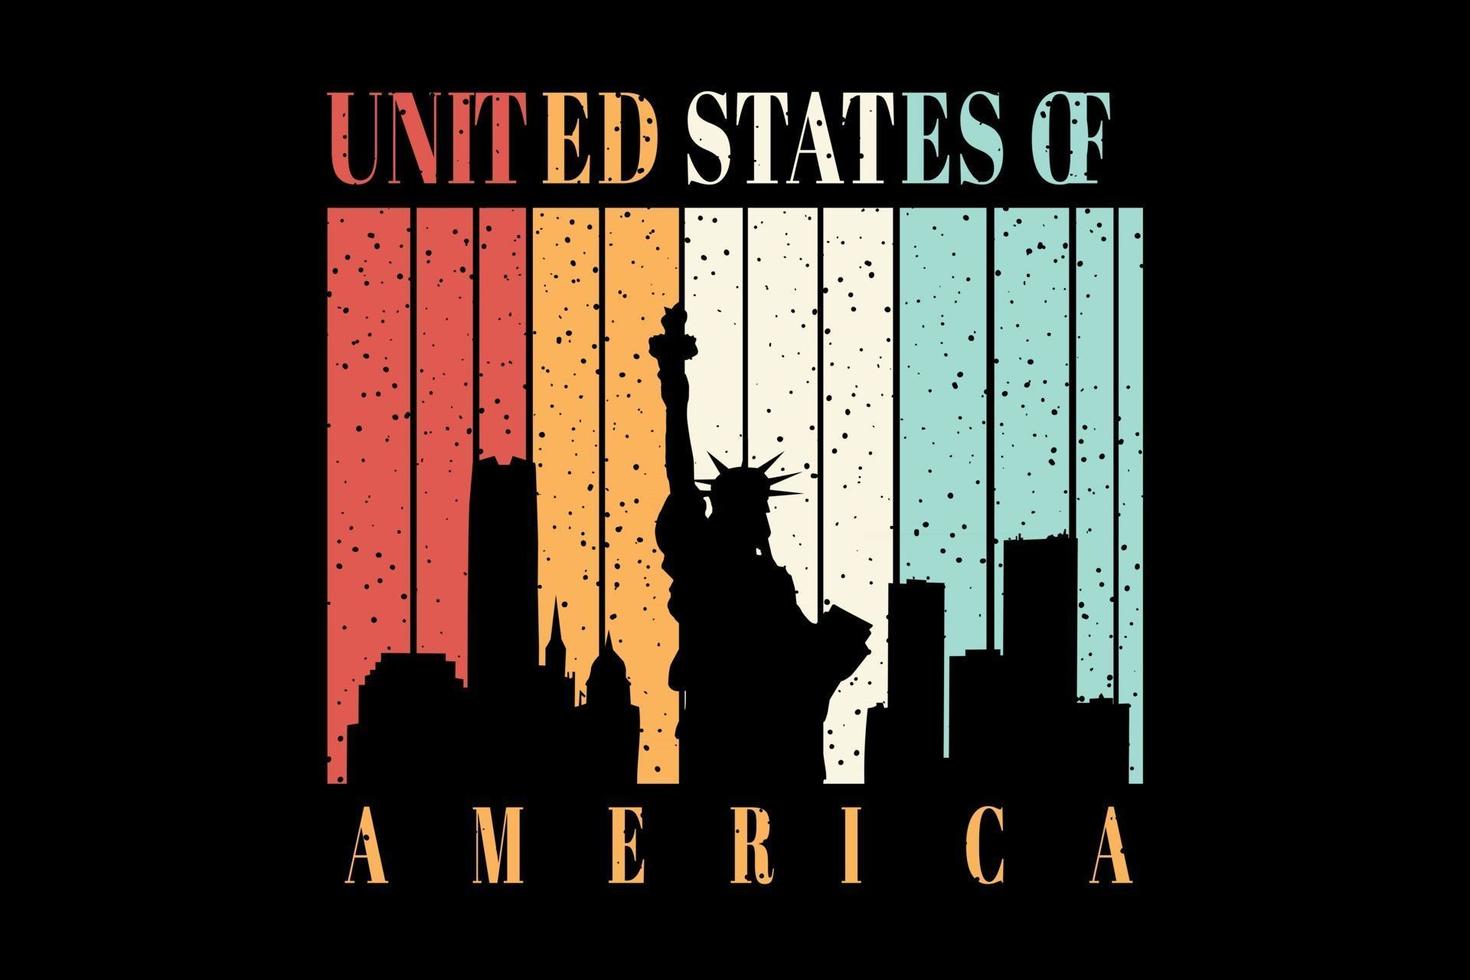 T-shirt statue of Liberty big building title united states of america vector